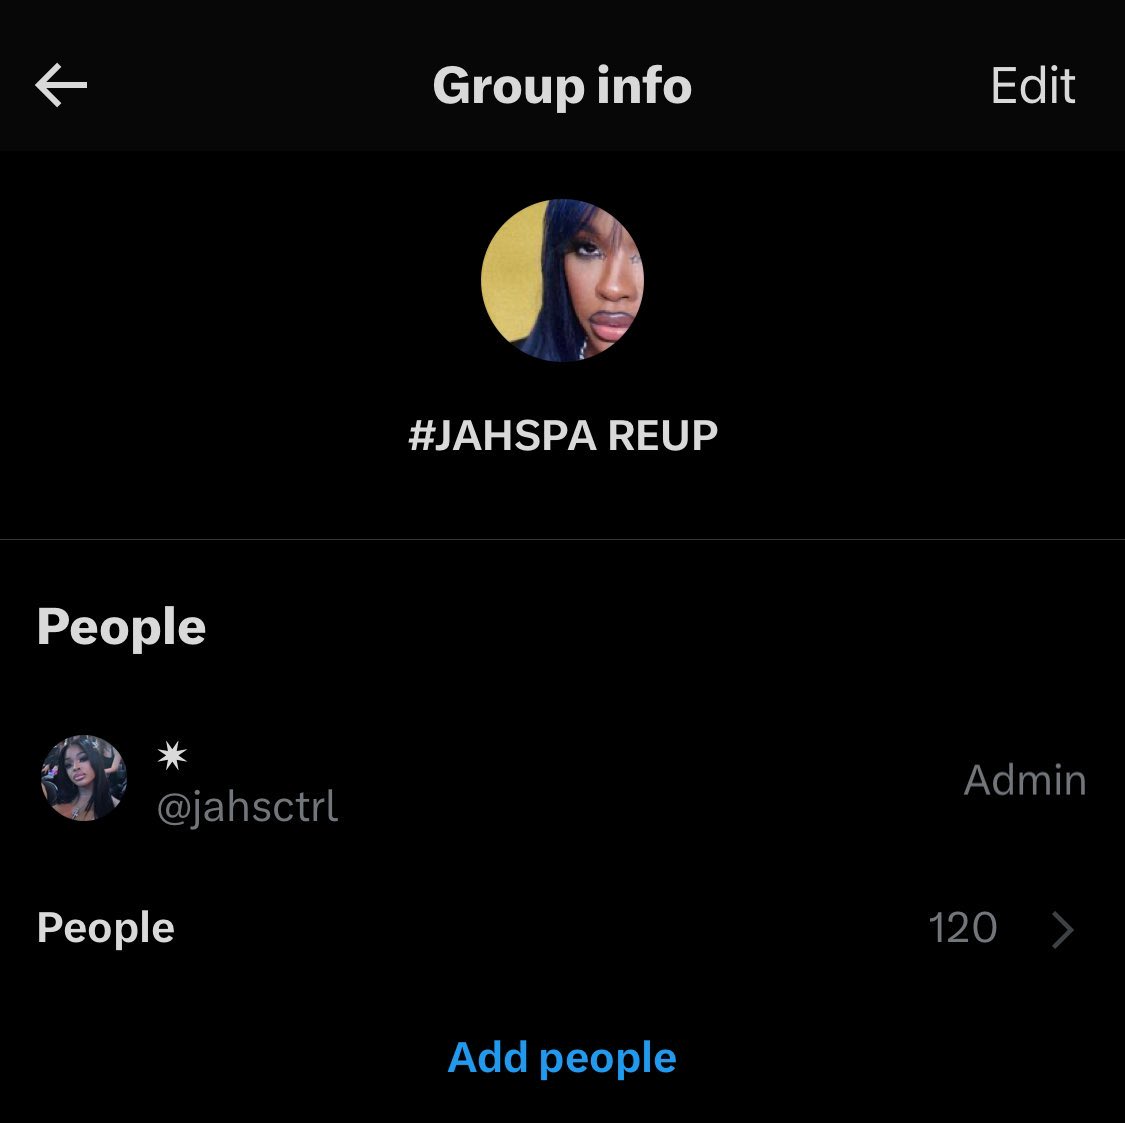 Tea, payola, and more! Who wanna be added?